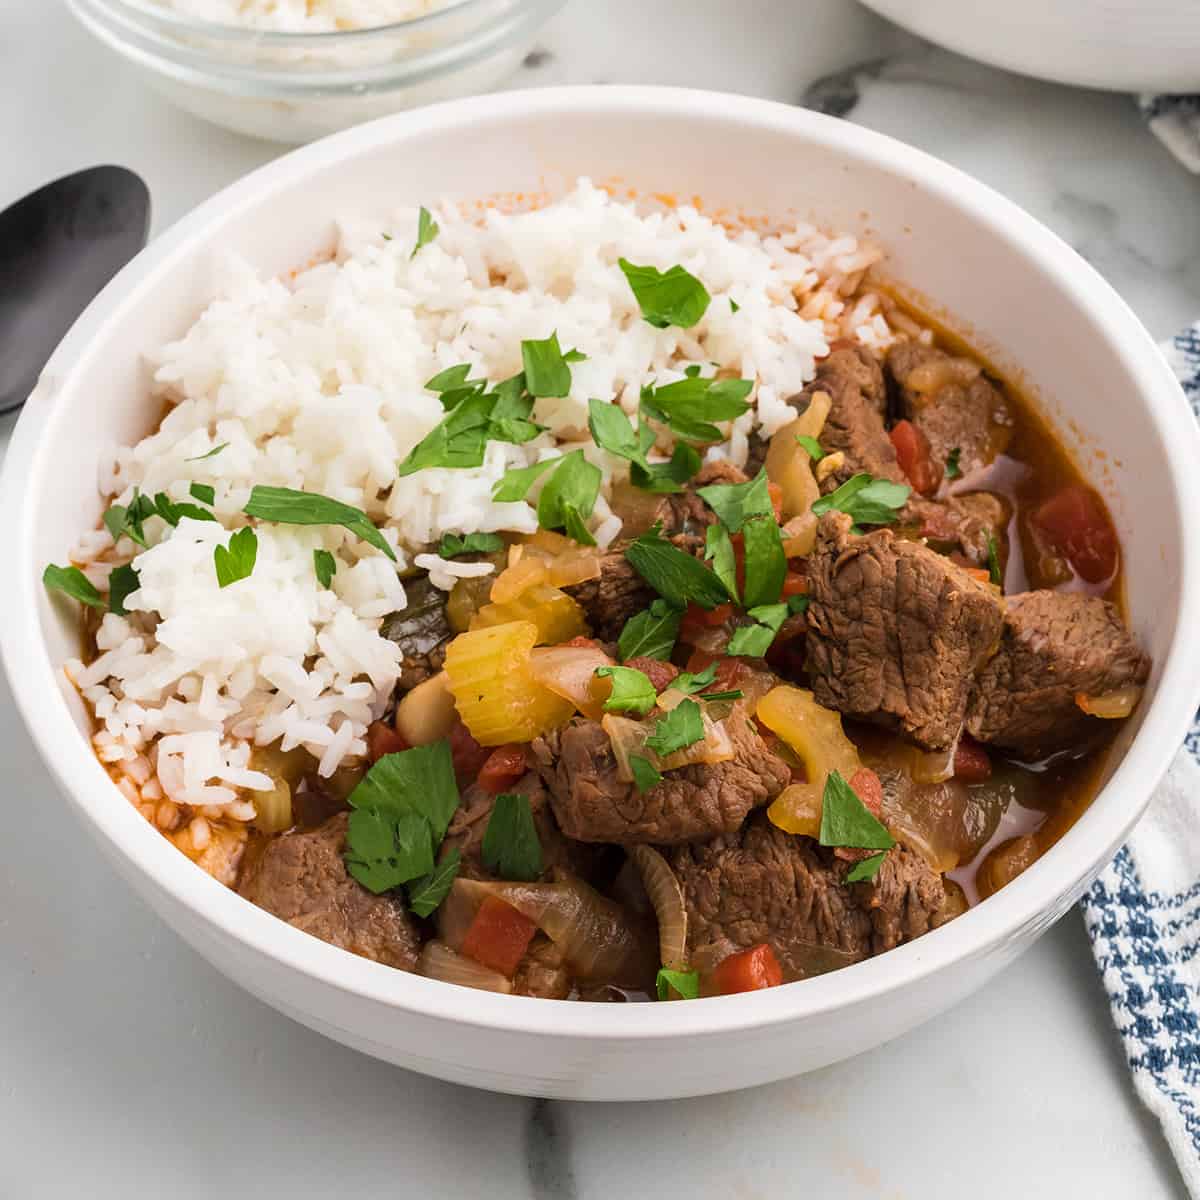 A serving of garlic lovers' beef stew over steamed rice in a white bowl.